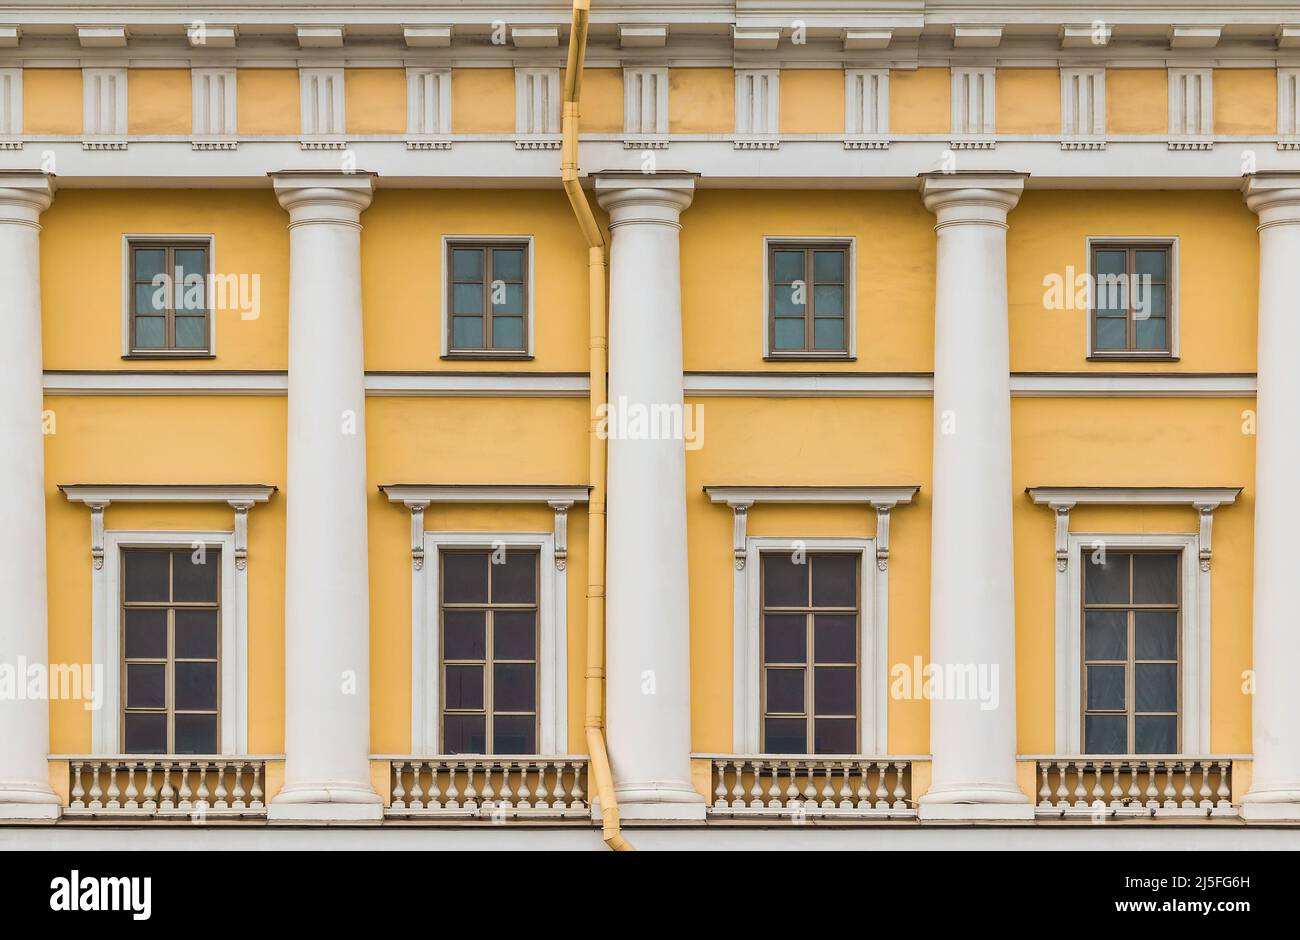 Columns and several windows in a row on the facade of the urban historic apartment building front view, Saint Petersburg, Russia Stock Photo